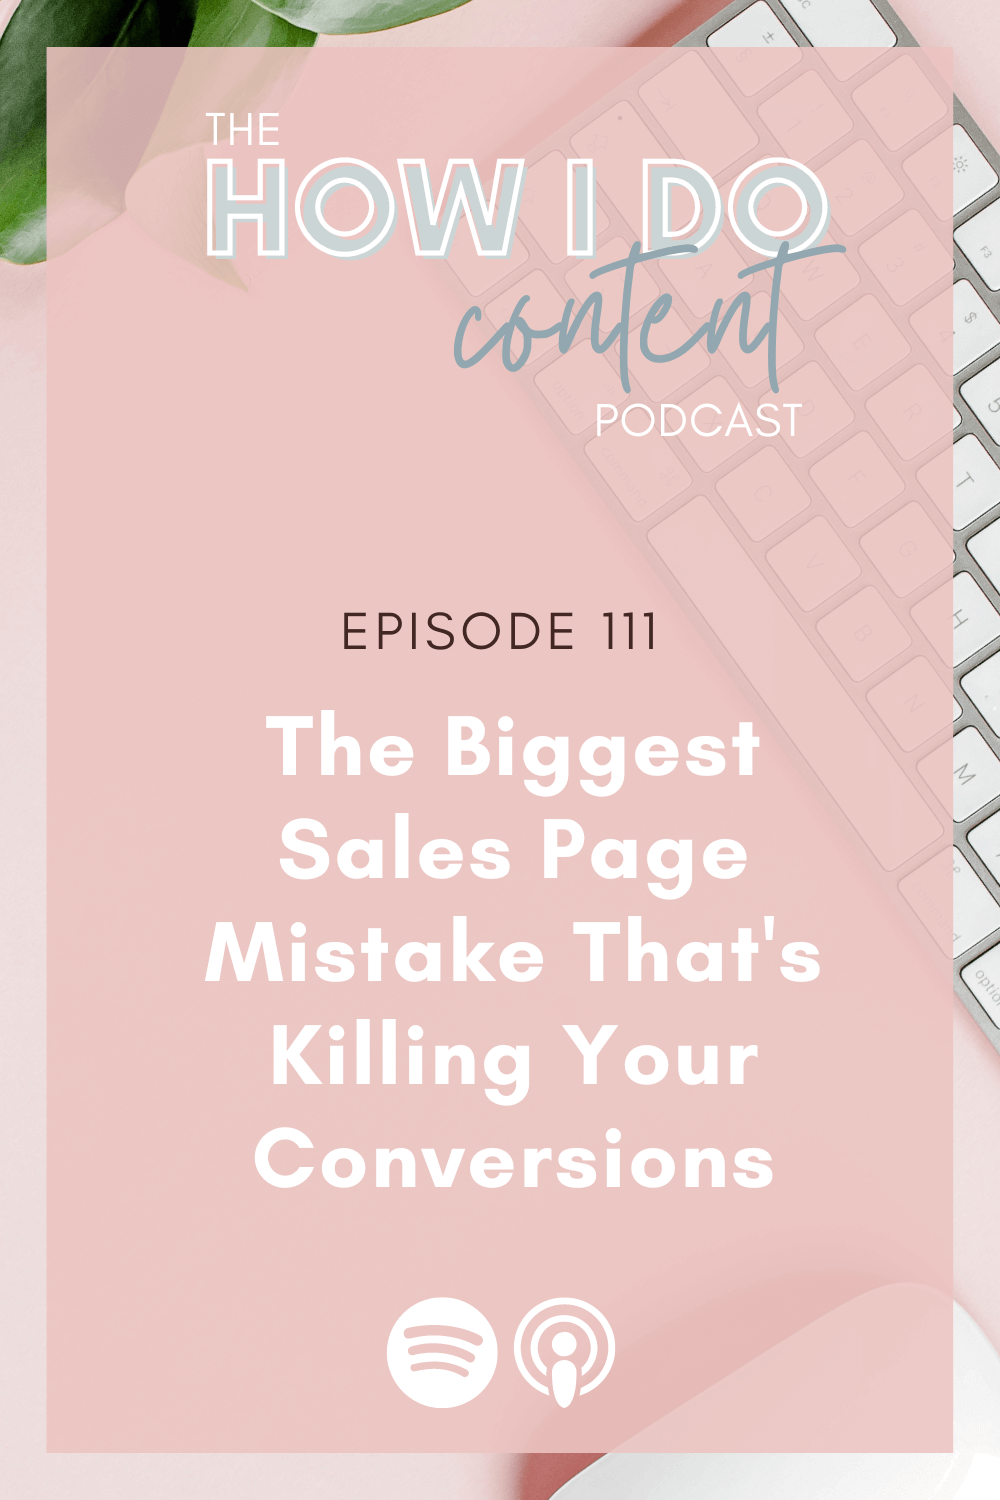 The Biggest Sales Page Mistake That's Killing Your Conversions